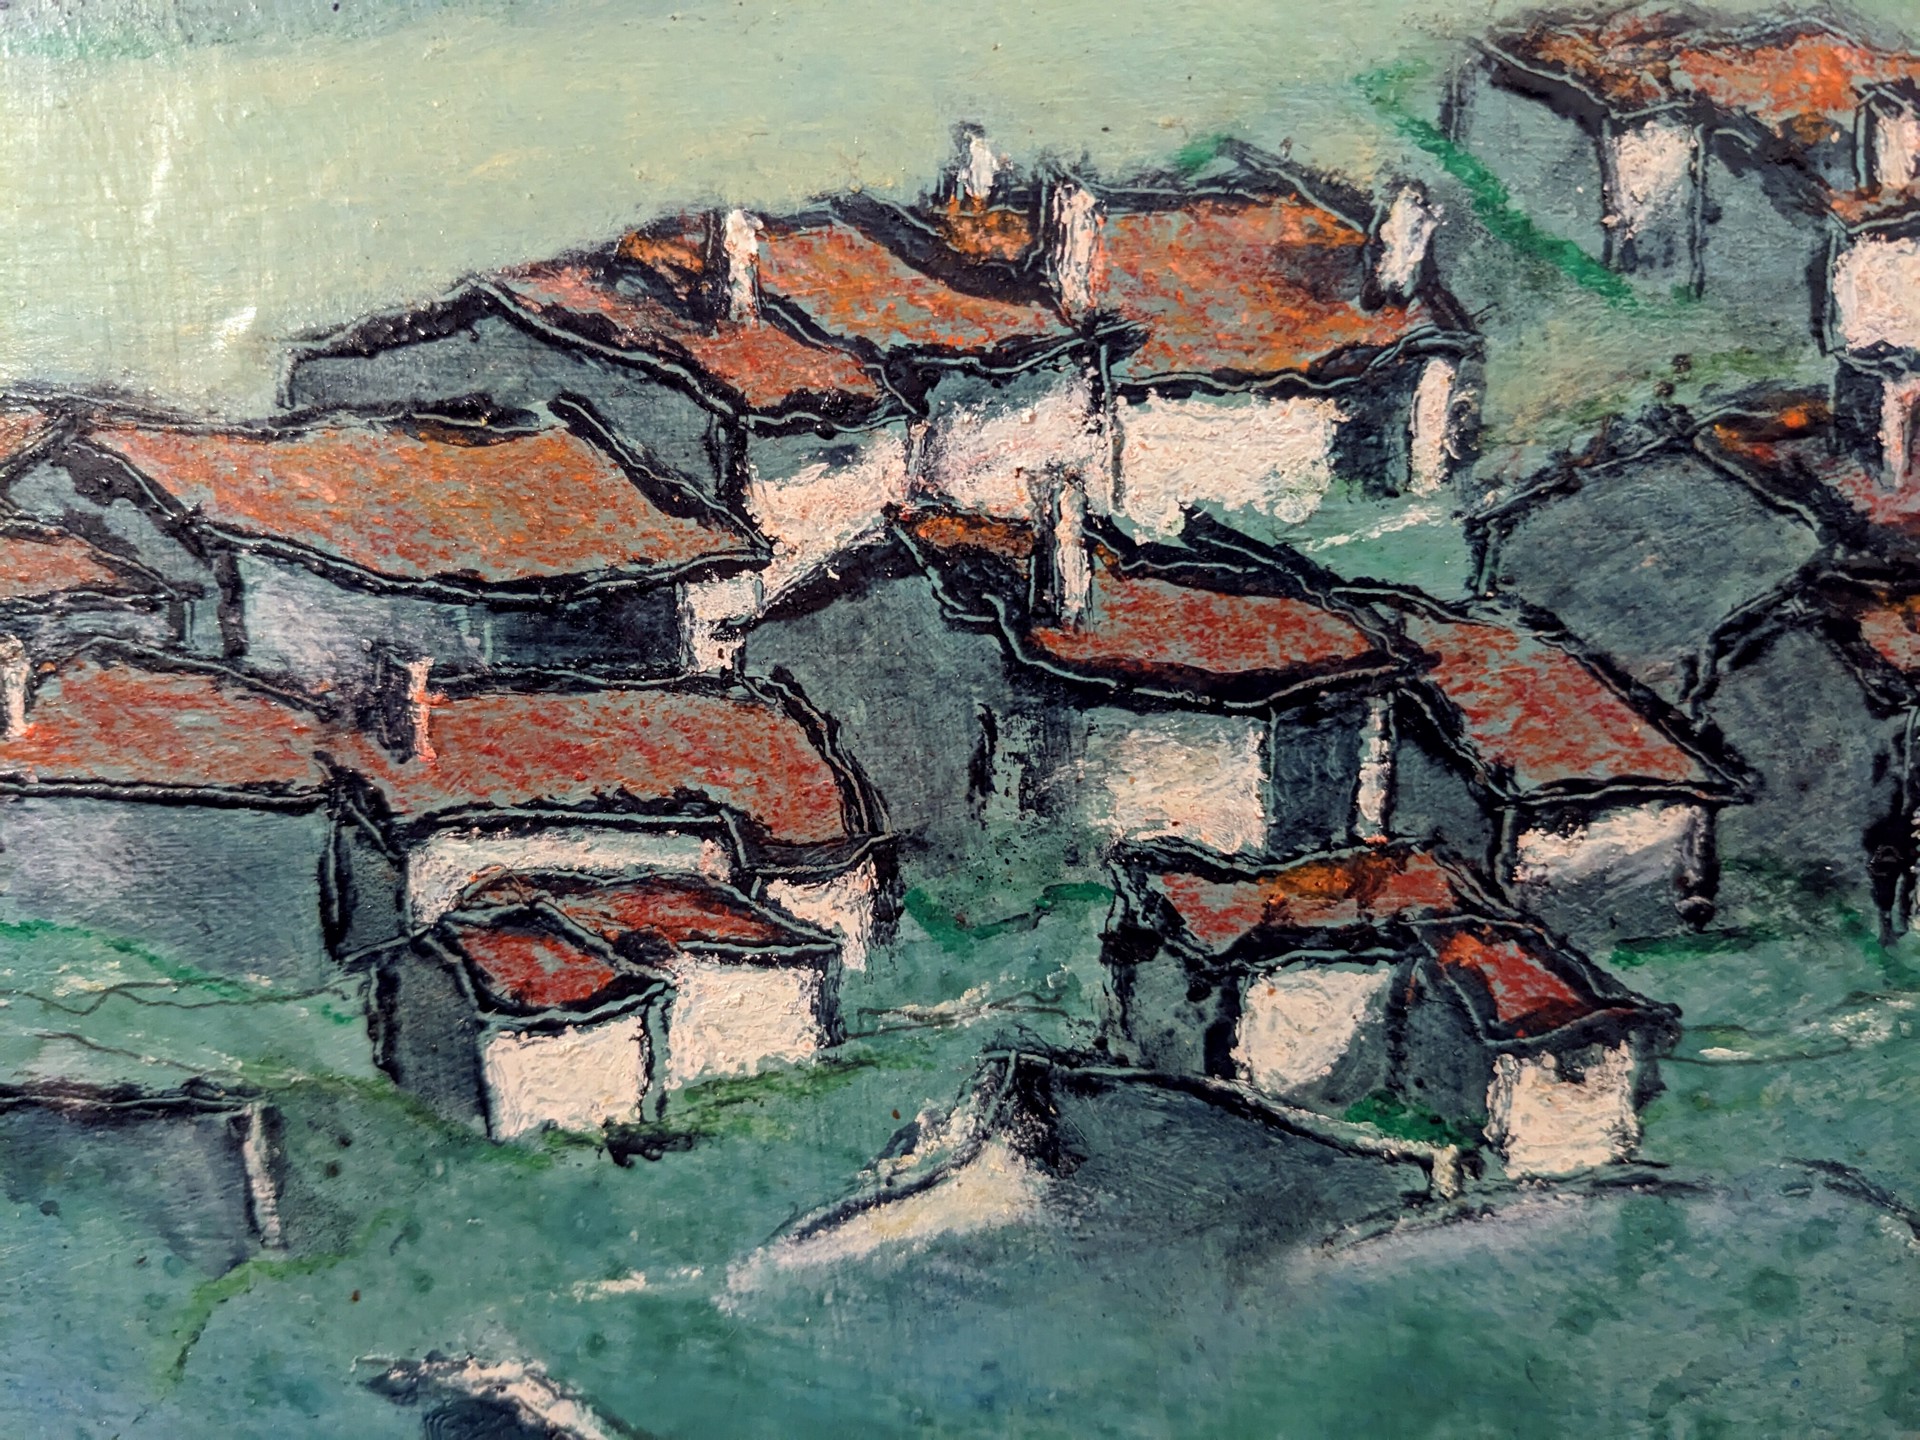 Houses on a Hill (Haute-Savoie) by Andy Newman